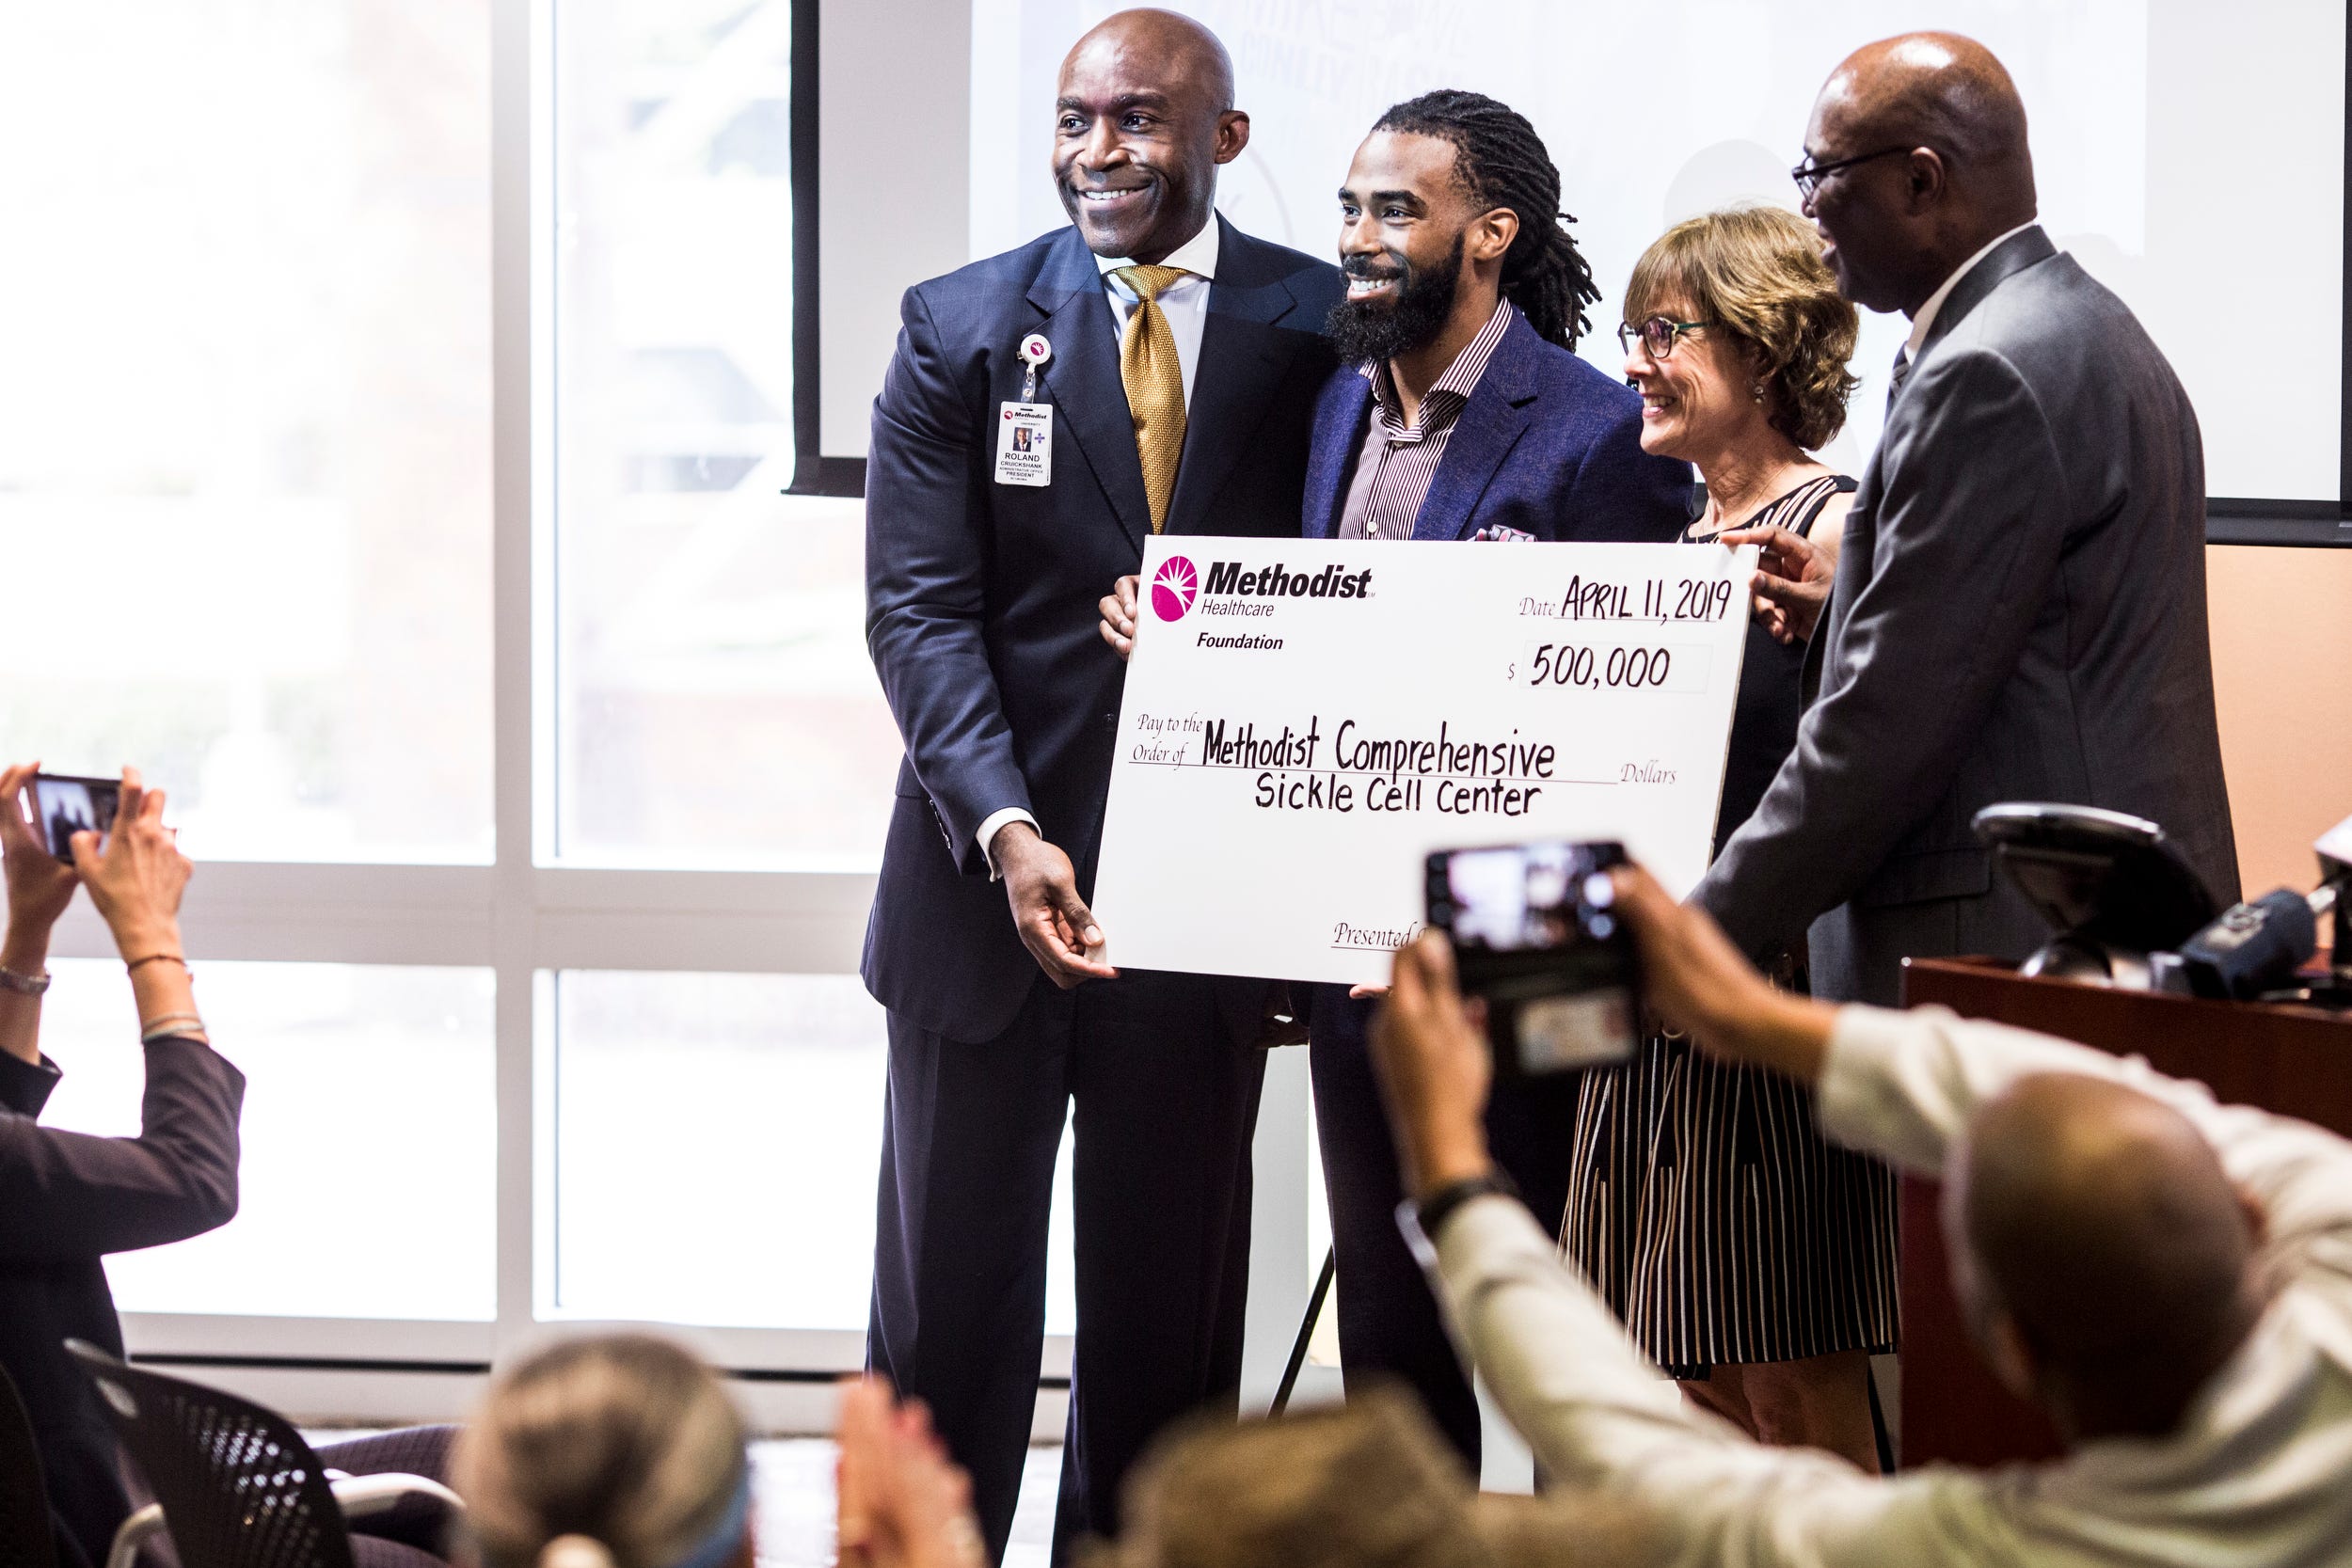 Mike Conley donating Methodist sickle cell center